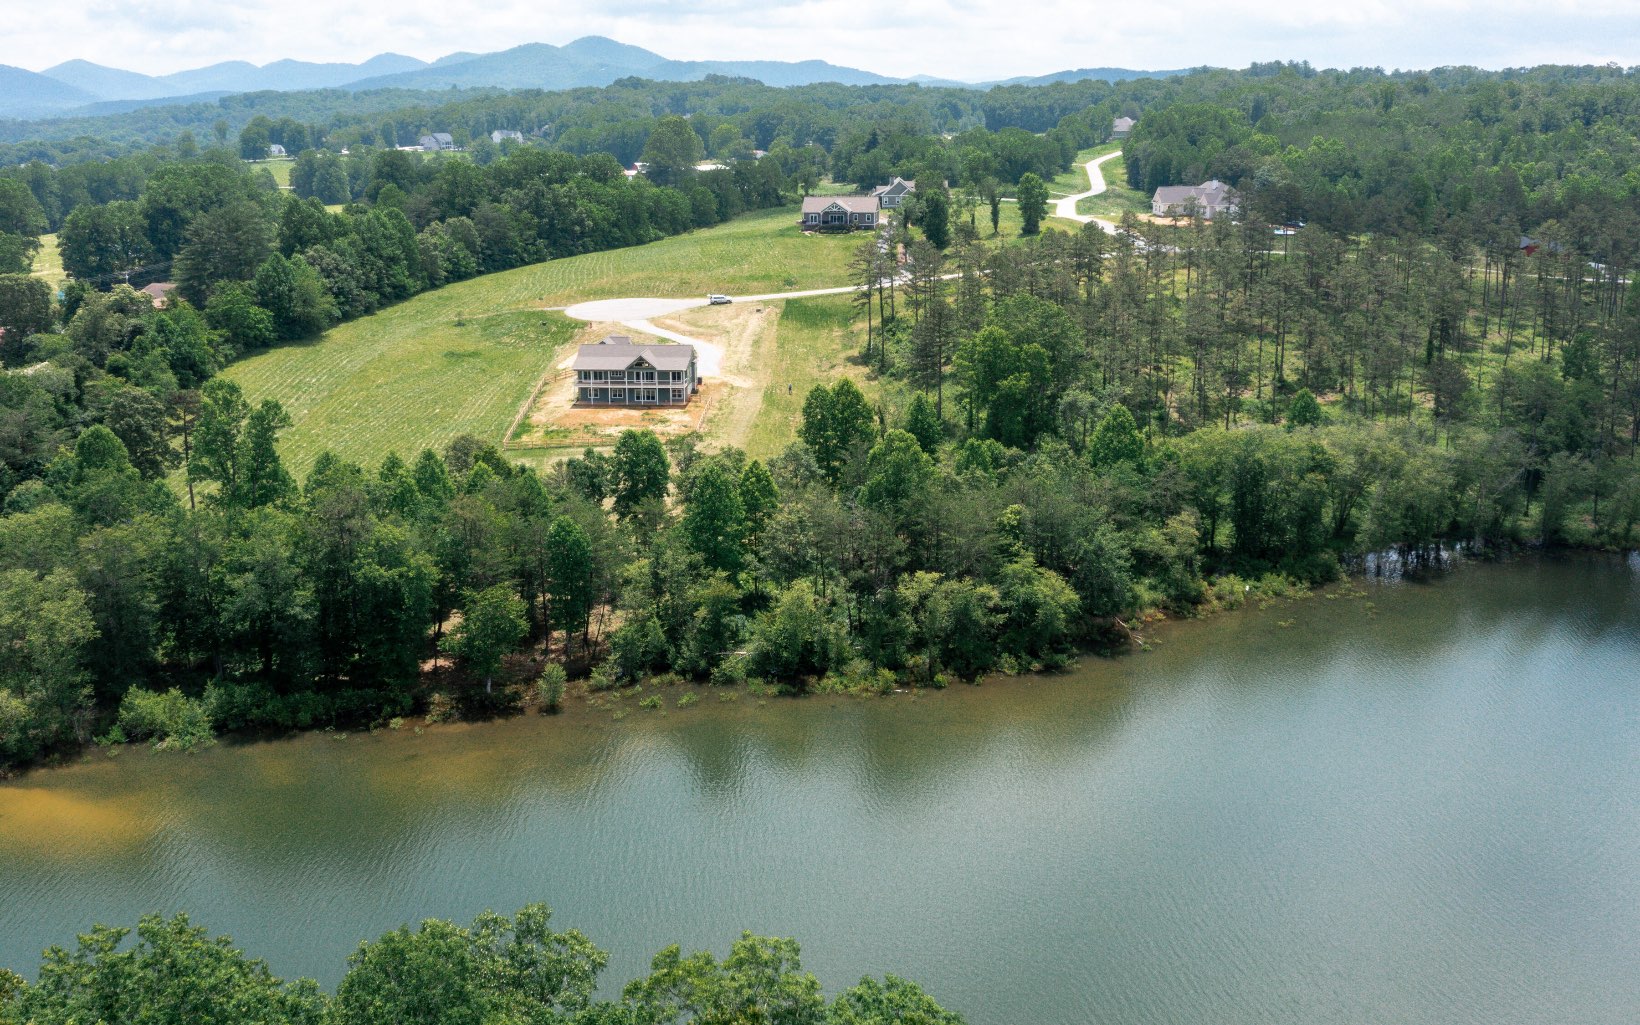 LAKE FRONT LOT IN THE NORTH GEORGIA MOUNTAINS!! Located in a convenient lakeside gated community, Hidden Harbor, this lot does not need much site prep or clearing of trees and is almost ready to build your mountain retreat. Public water available, underground utilities, paved roads, an easy drive to Blairsville or Murphy NC PLUS the best of boating, fishing, kayaking, paddle boarding.